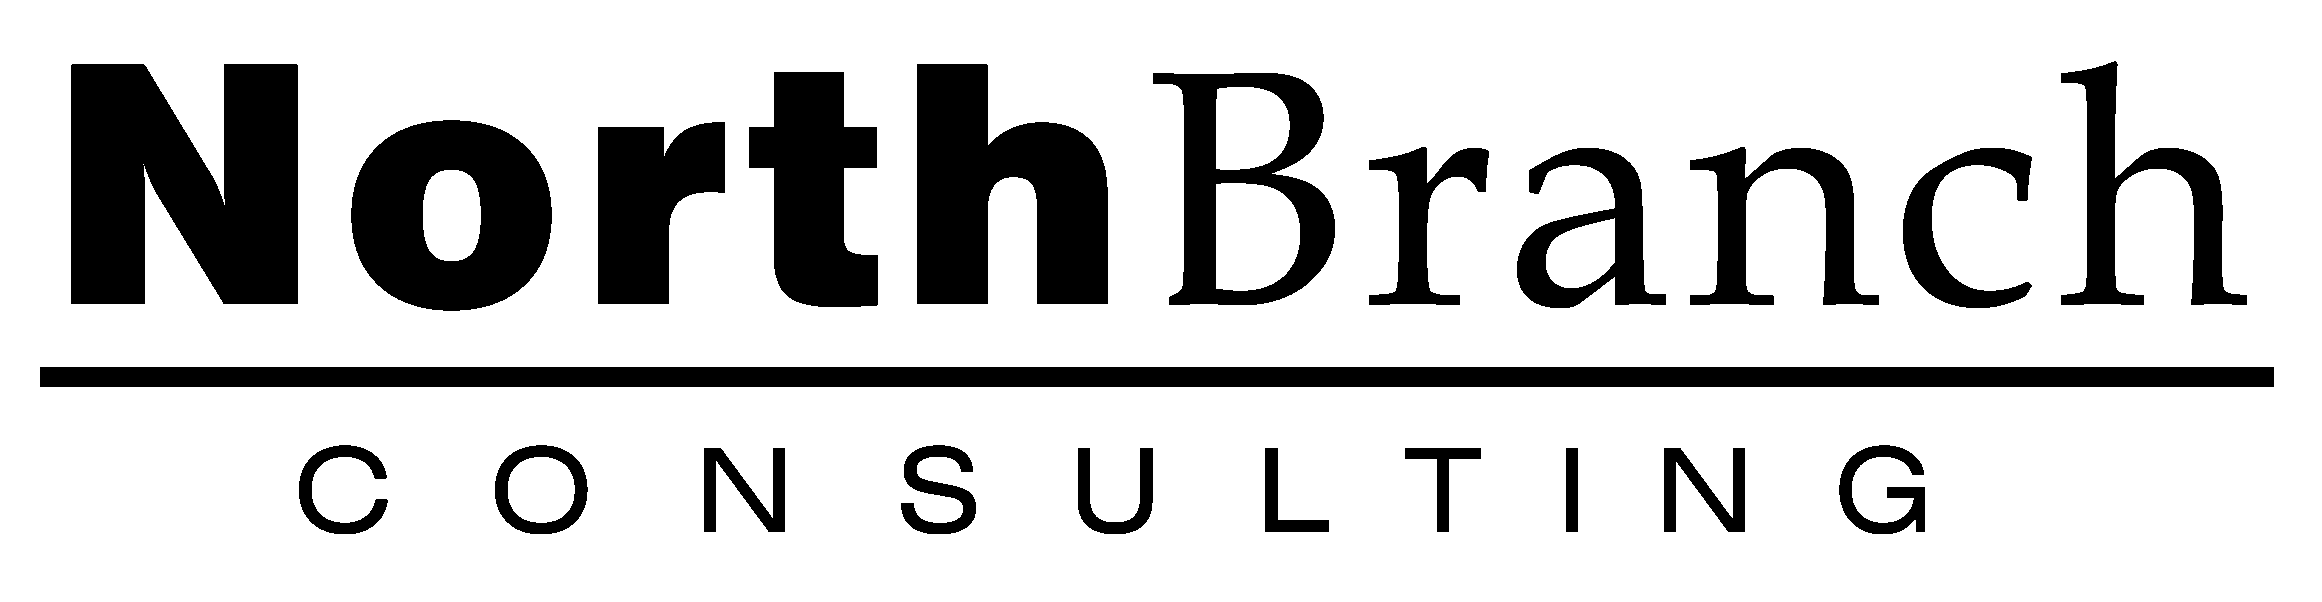 NorthBranch Consulting